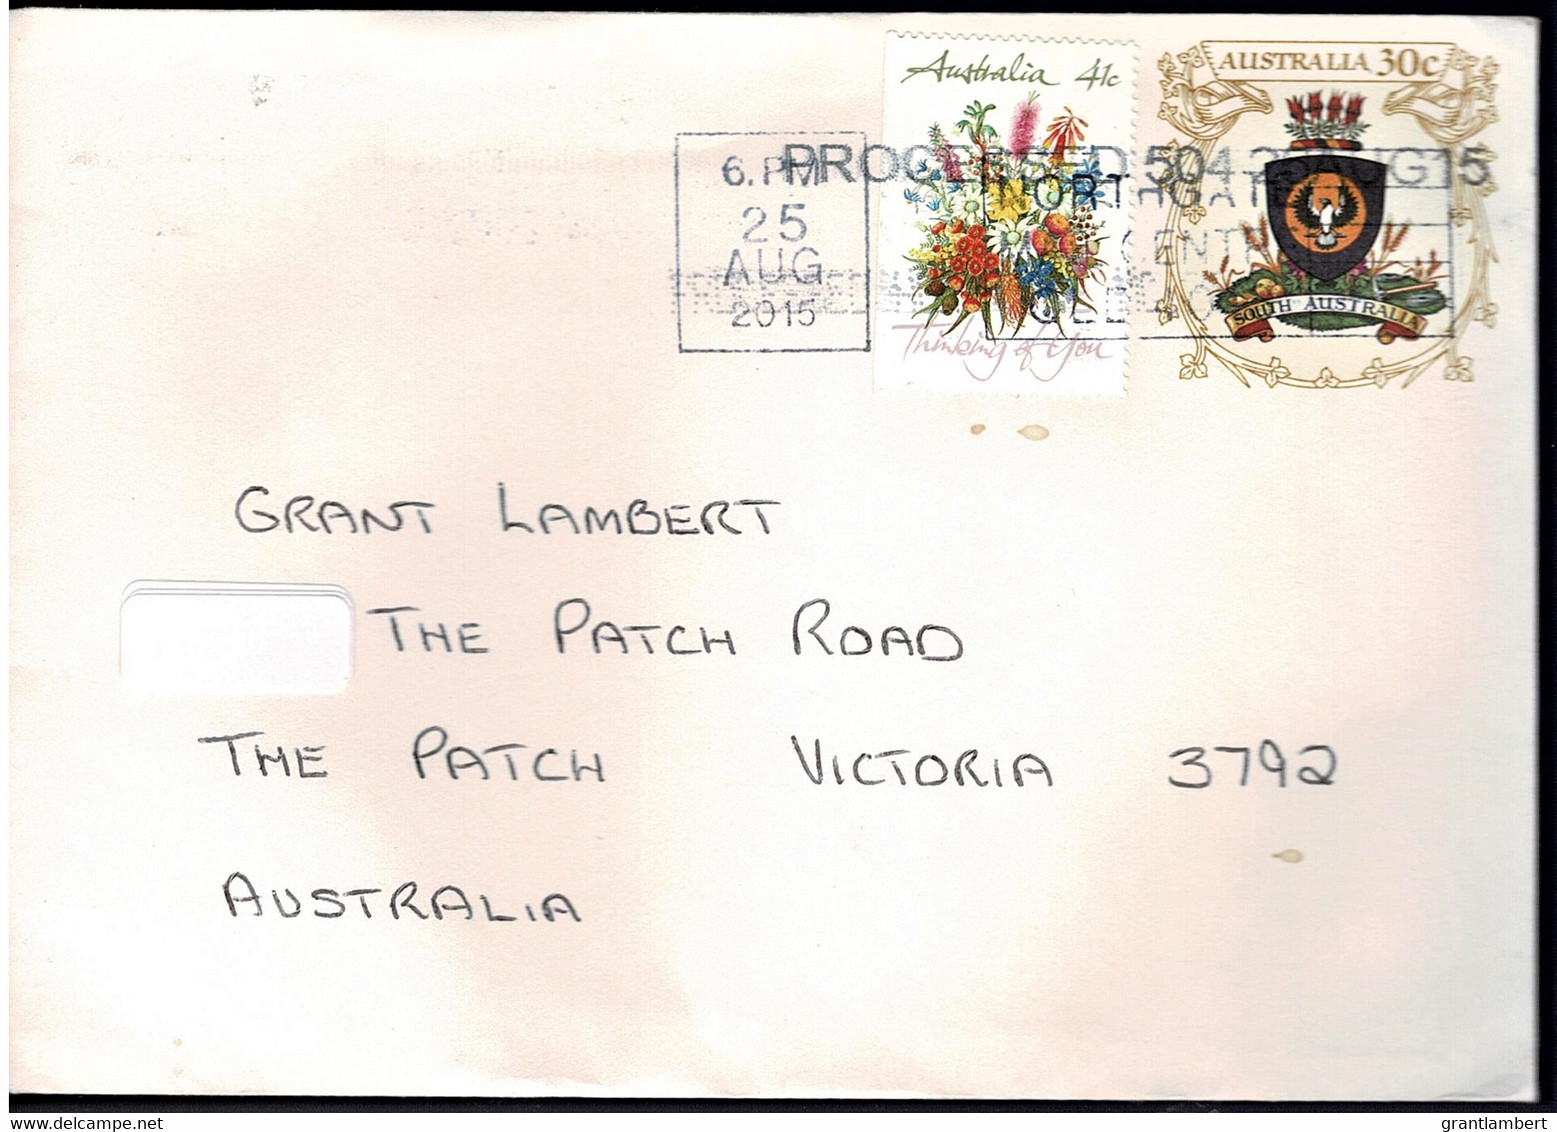 Australia 2015 South Australian Coat Of Arms Uprated PreStamped Envelope - Covers & Documents